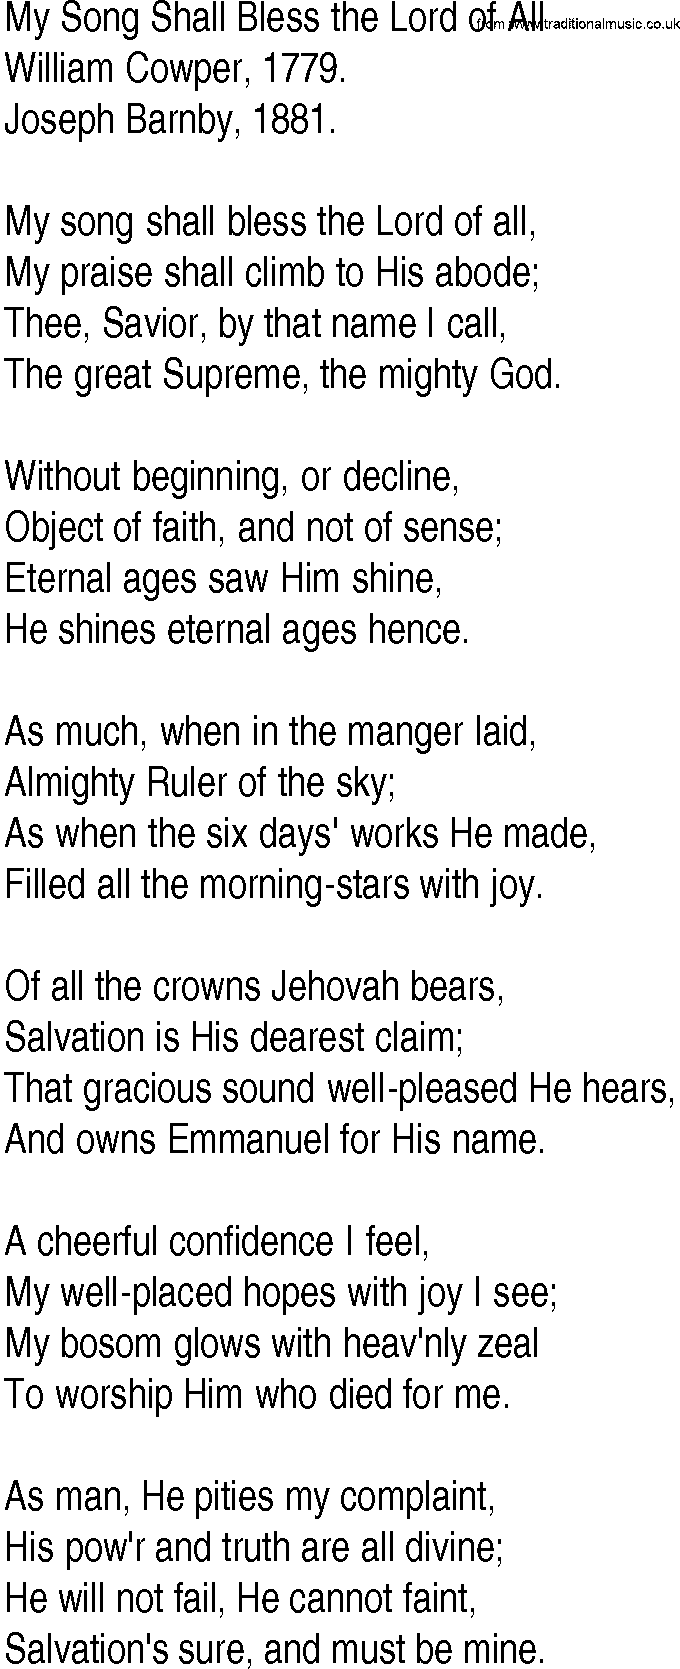 Hymn and Gospel Song: My Song Shall Bless the Lord of All by William Cowper lyrics